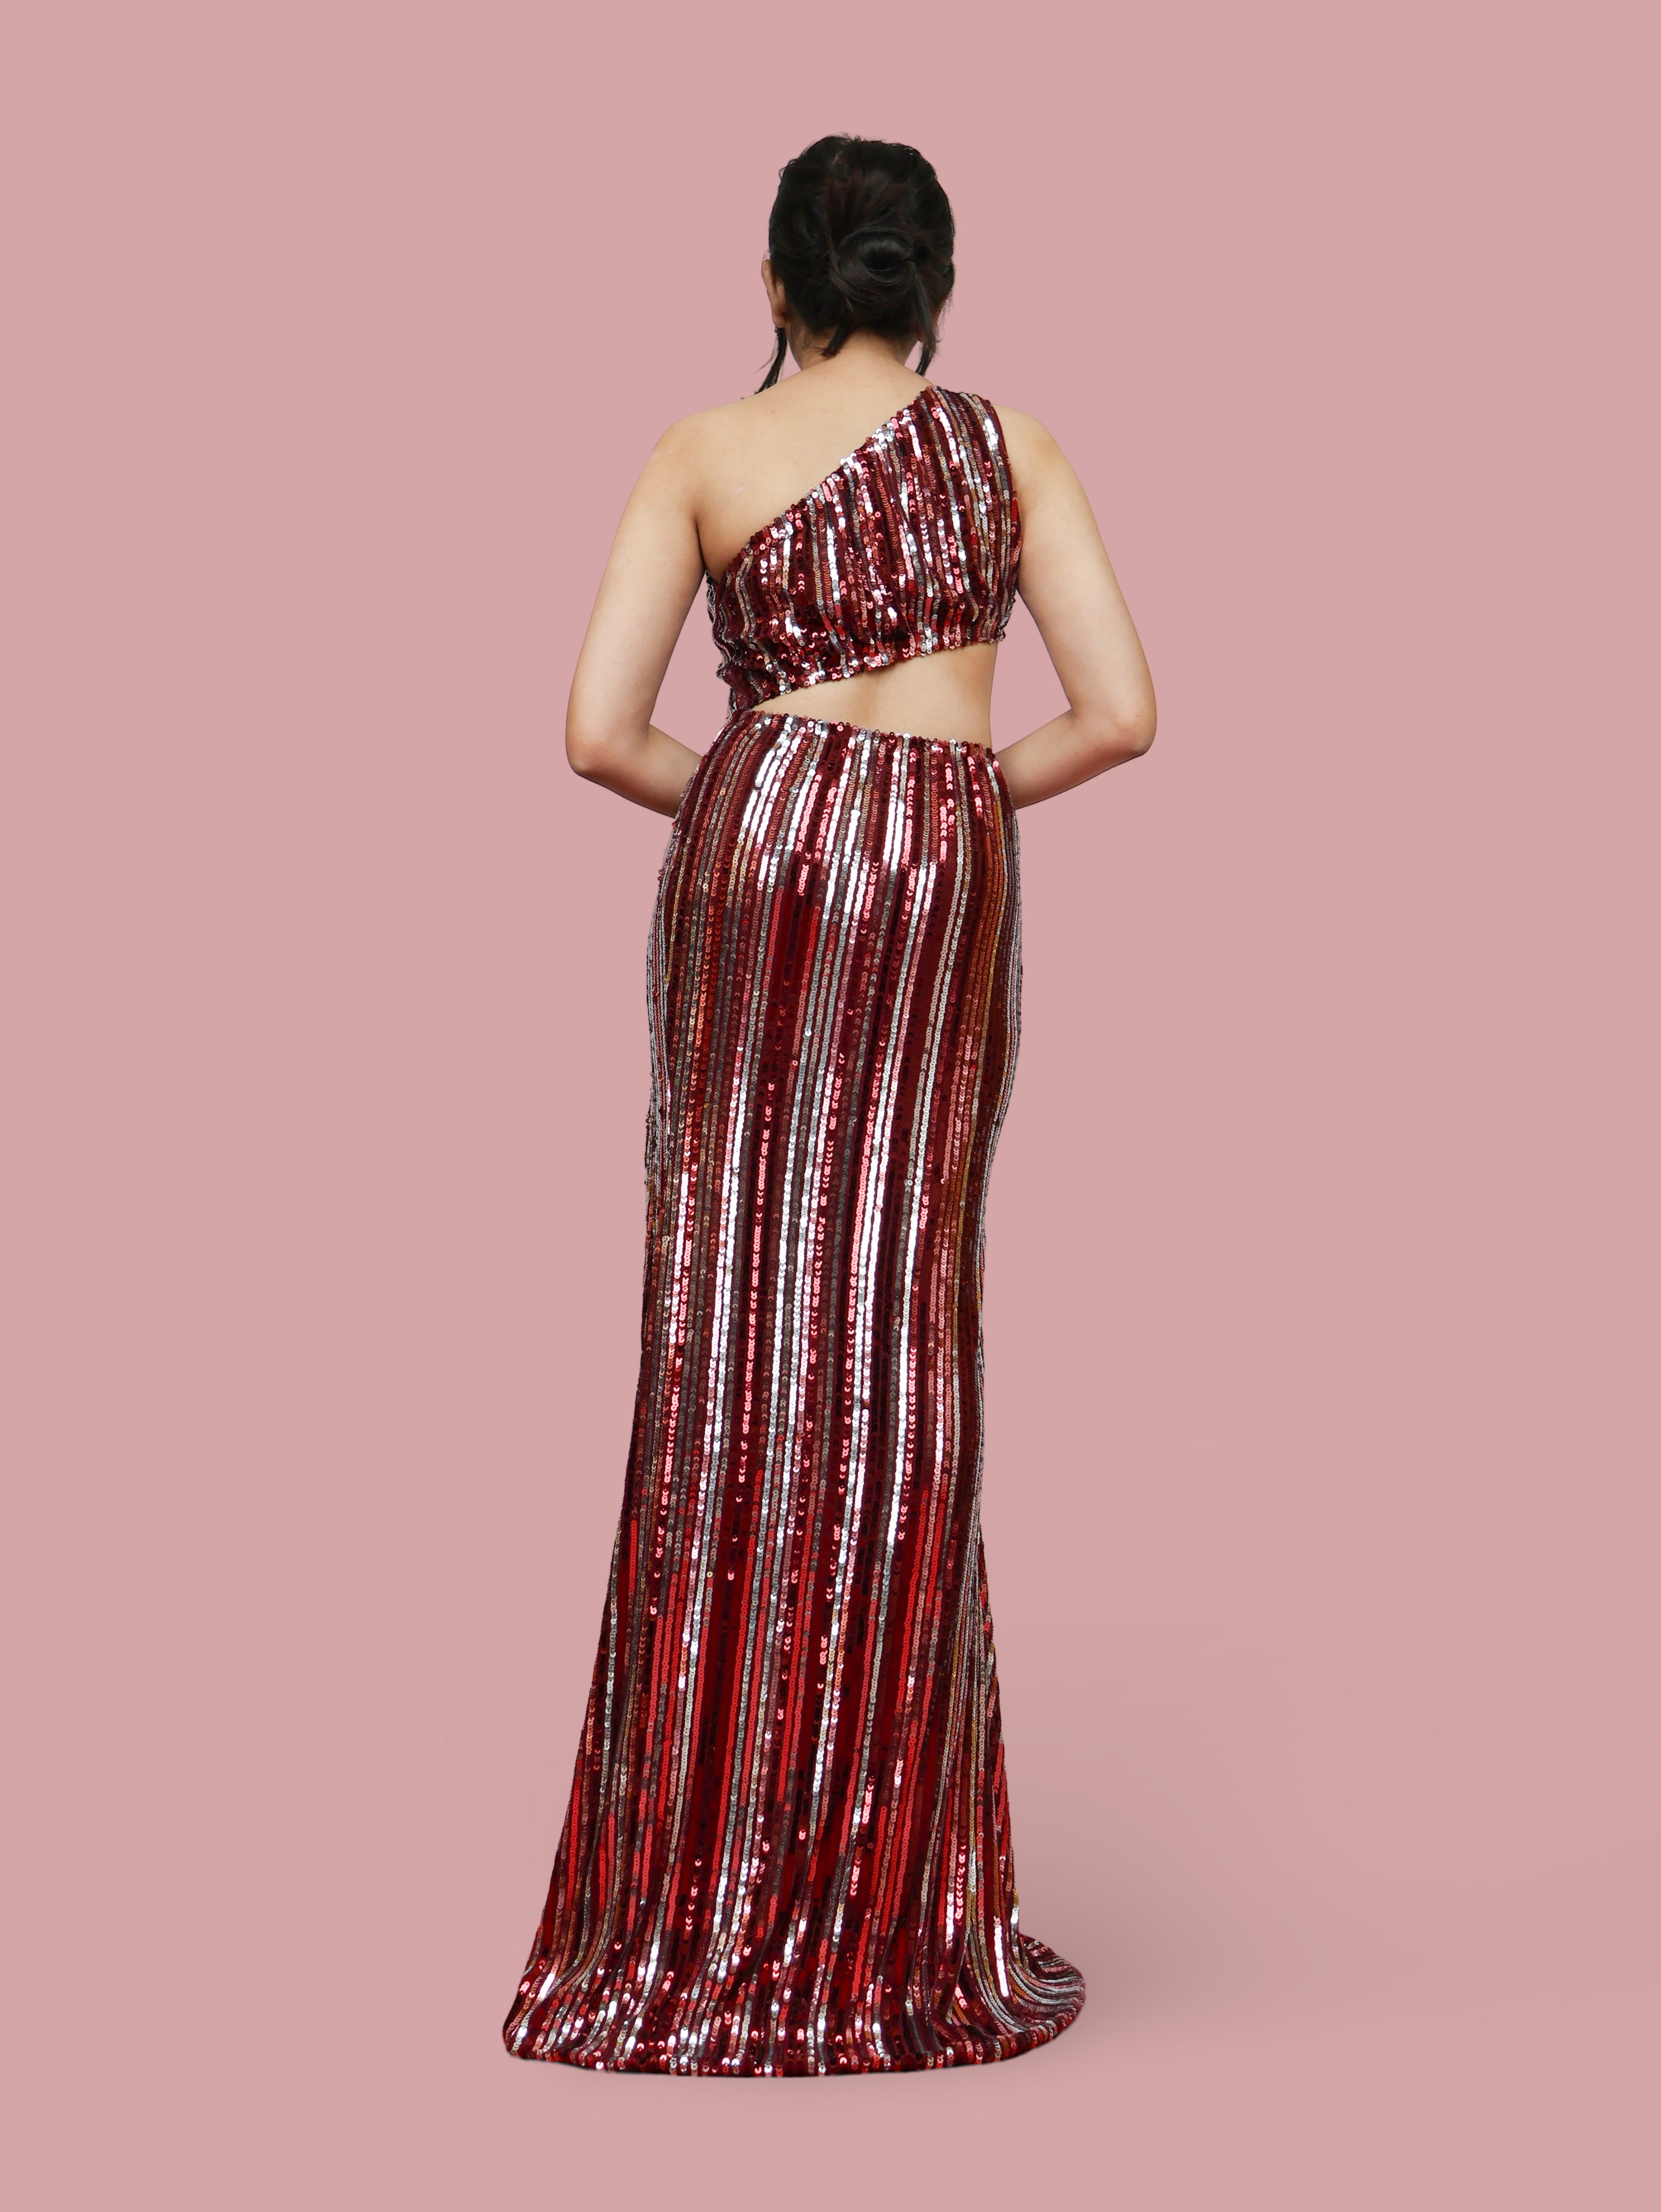 One-Shoulder Sequin Maxi Party Dress by Shreekama Maroon Dress for Party Festival Wedding Occasion in Noida